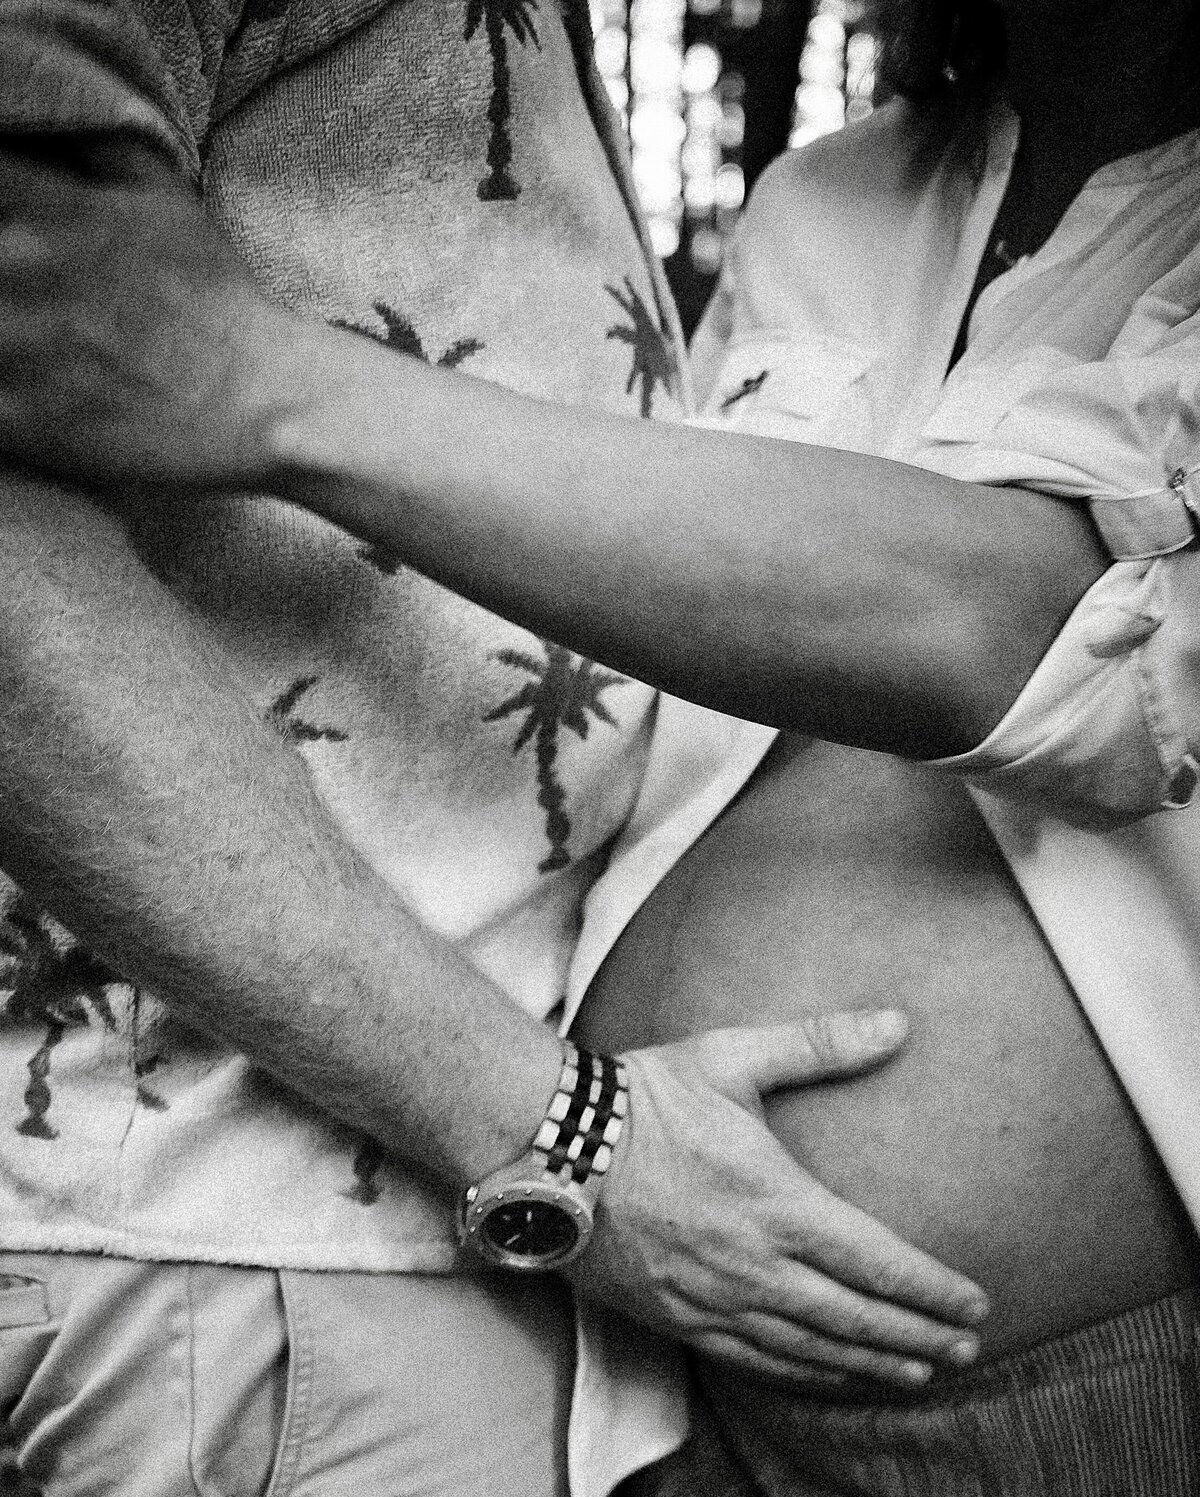 Close up image of pregnant belly and partner's hands